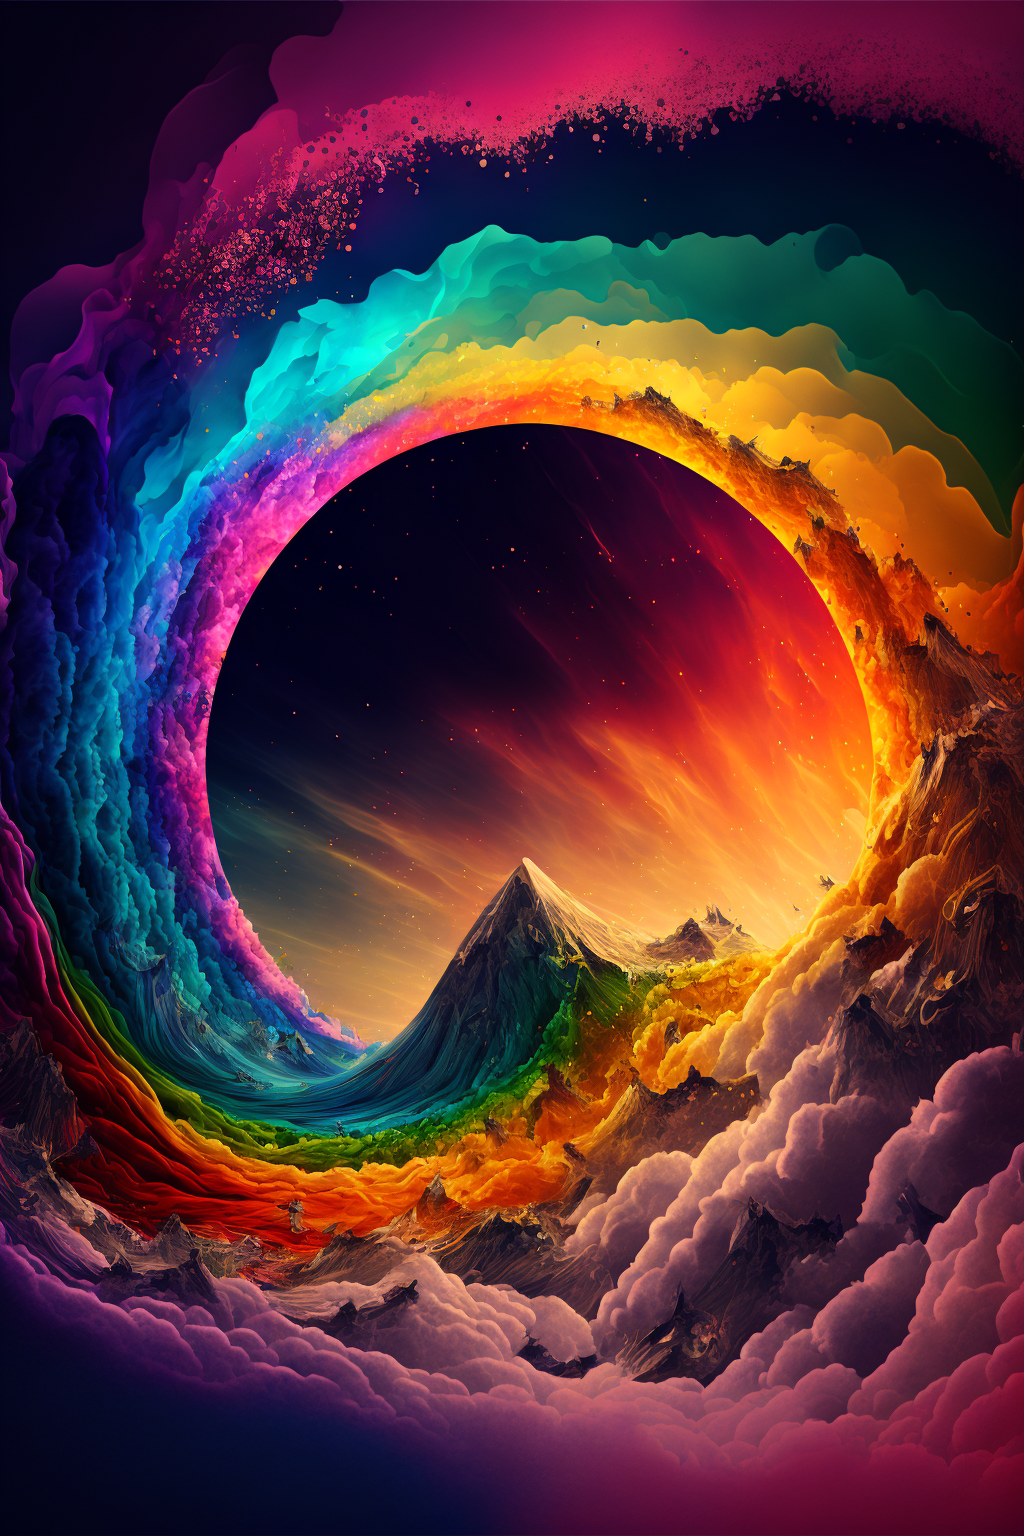 Rainbow in the style of Psytrance UHD 4